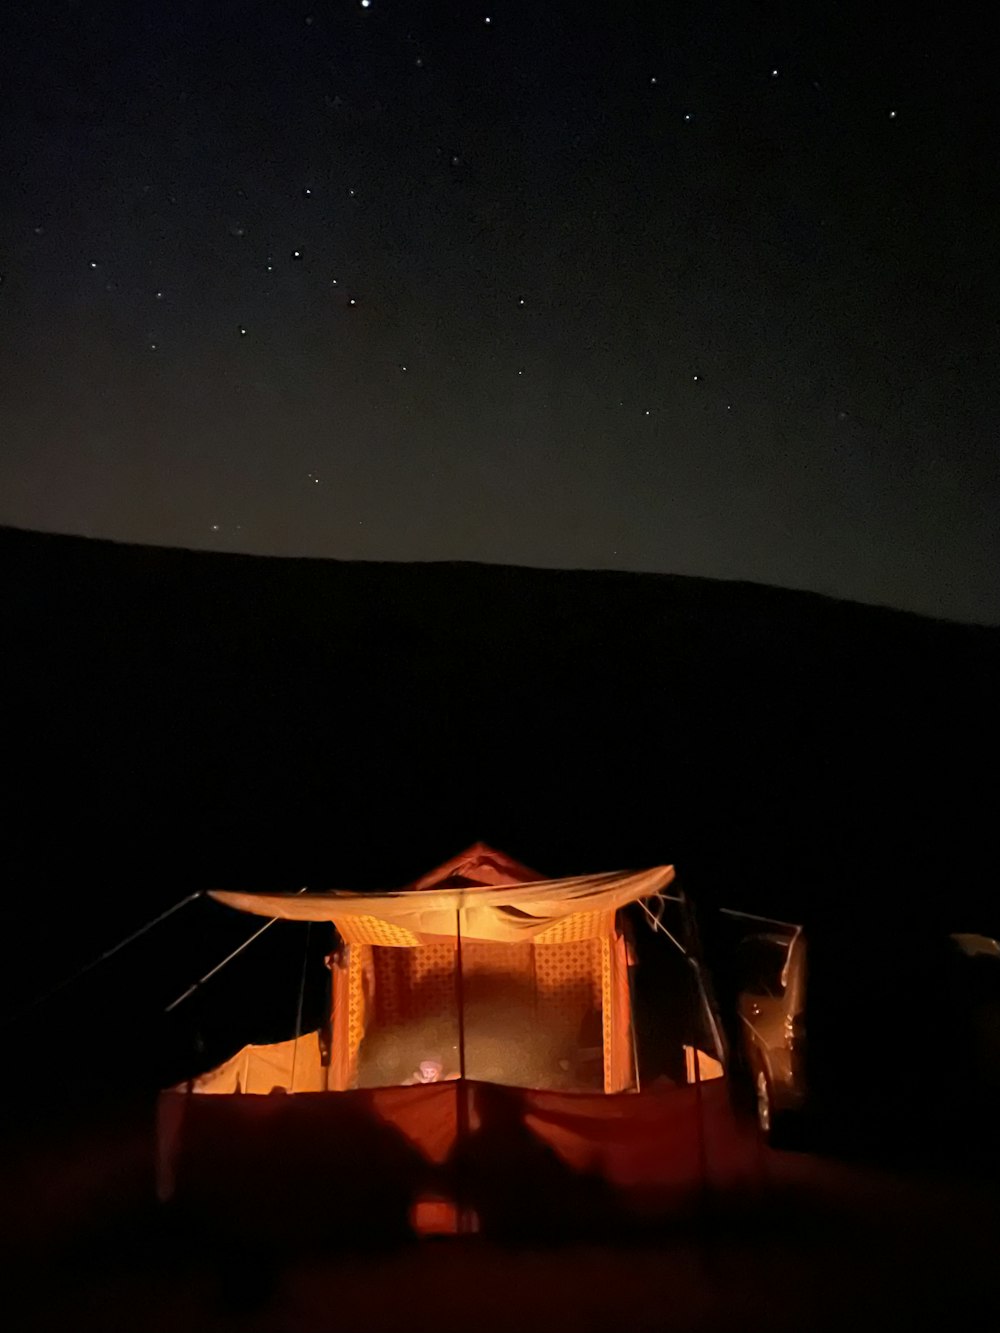 a tent is lit up at night with stars in the sky